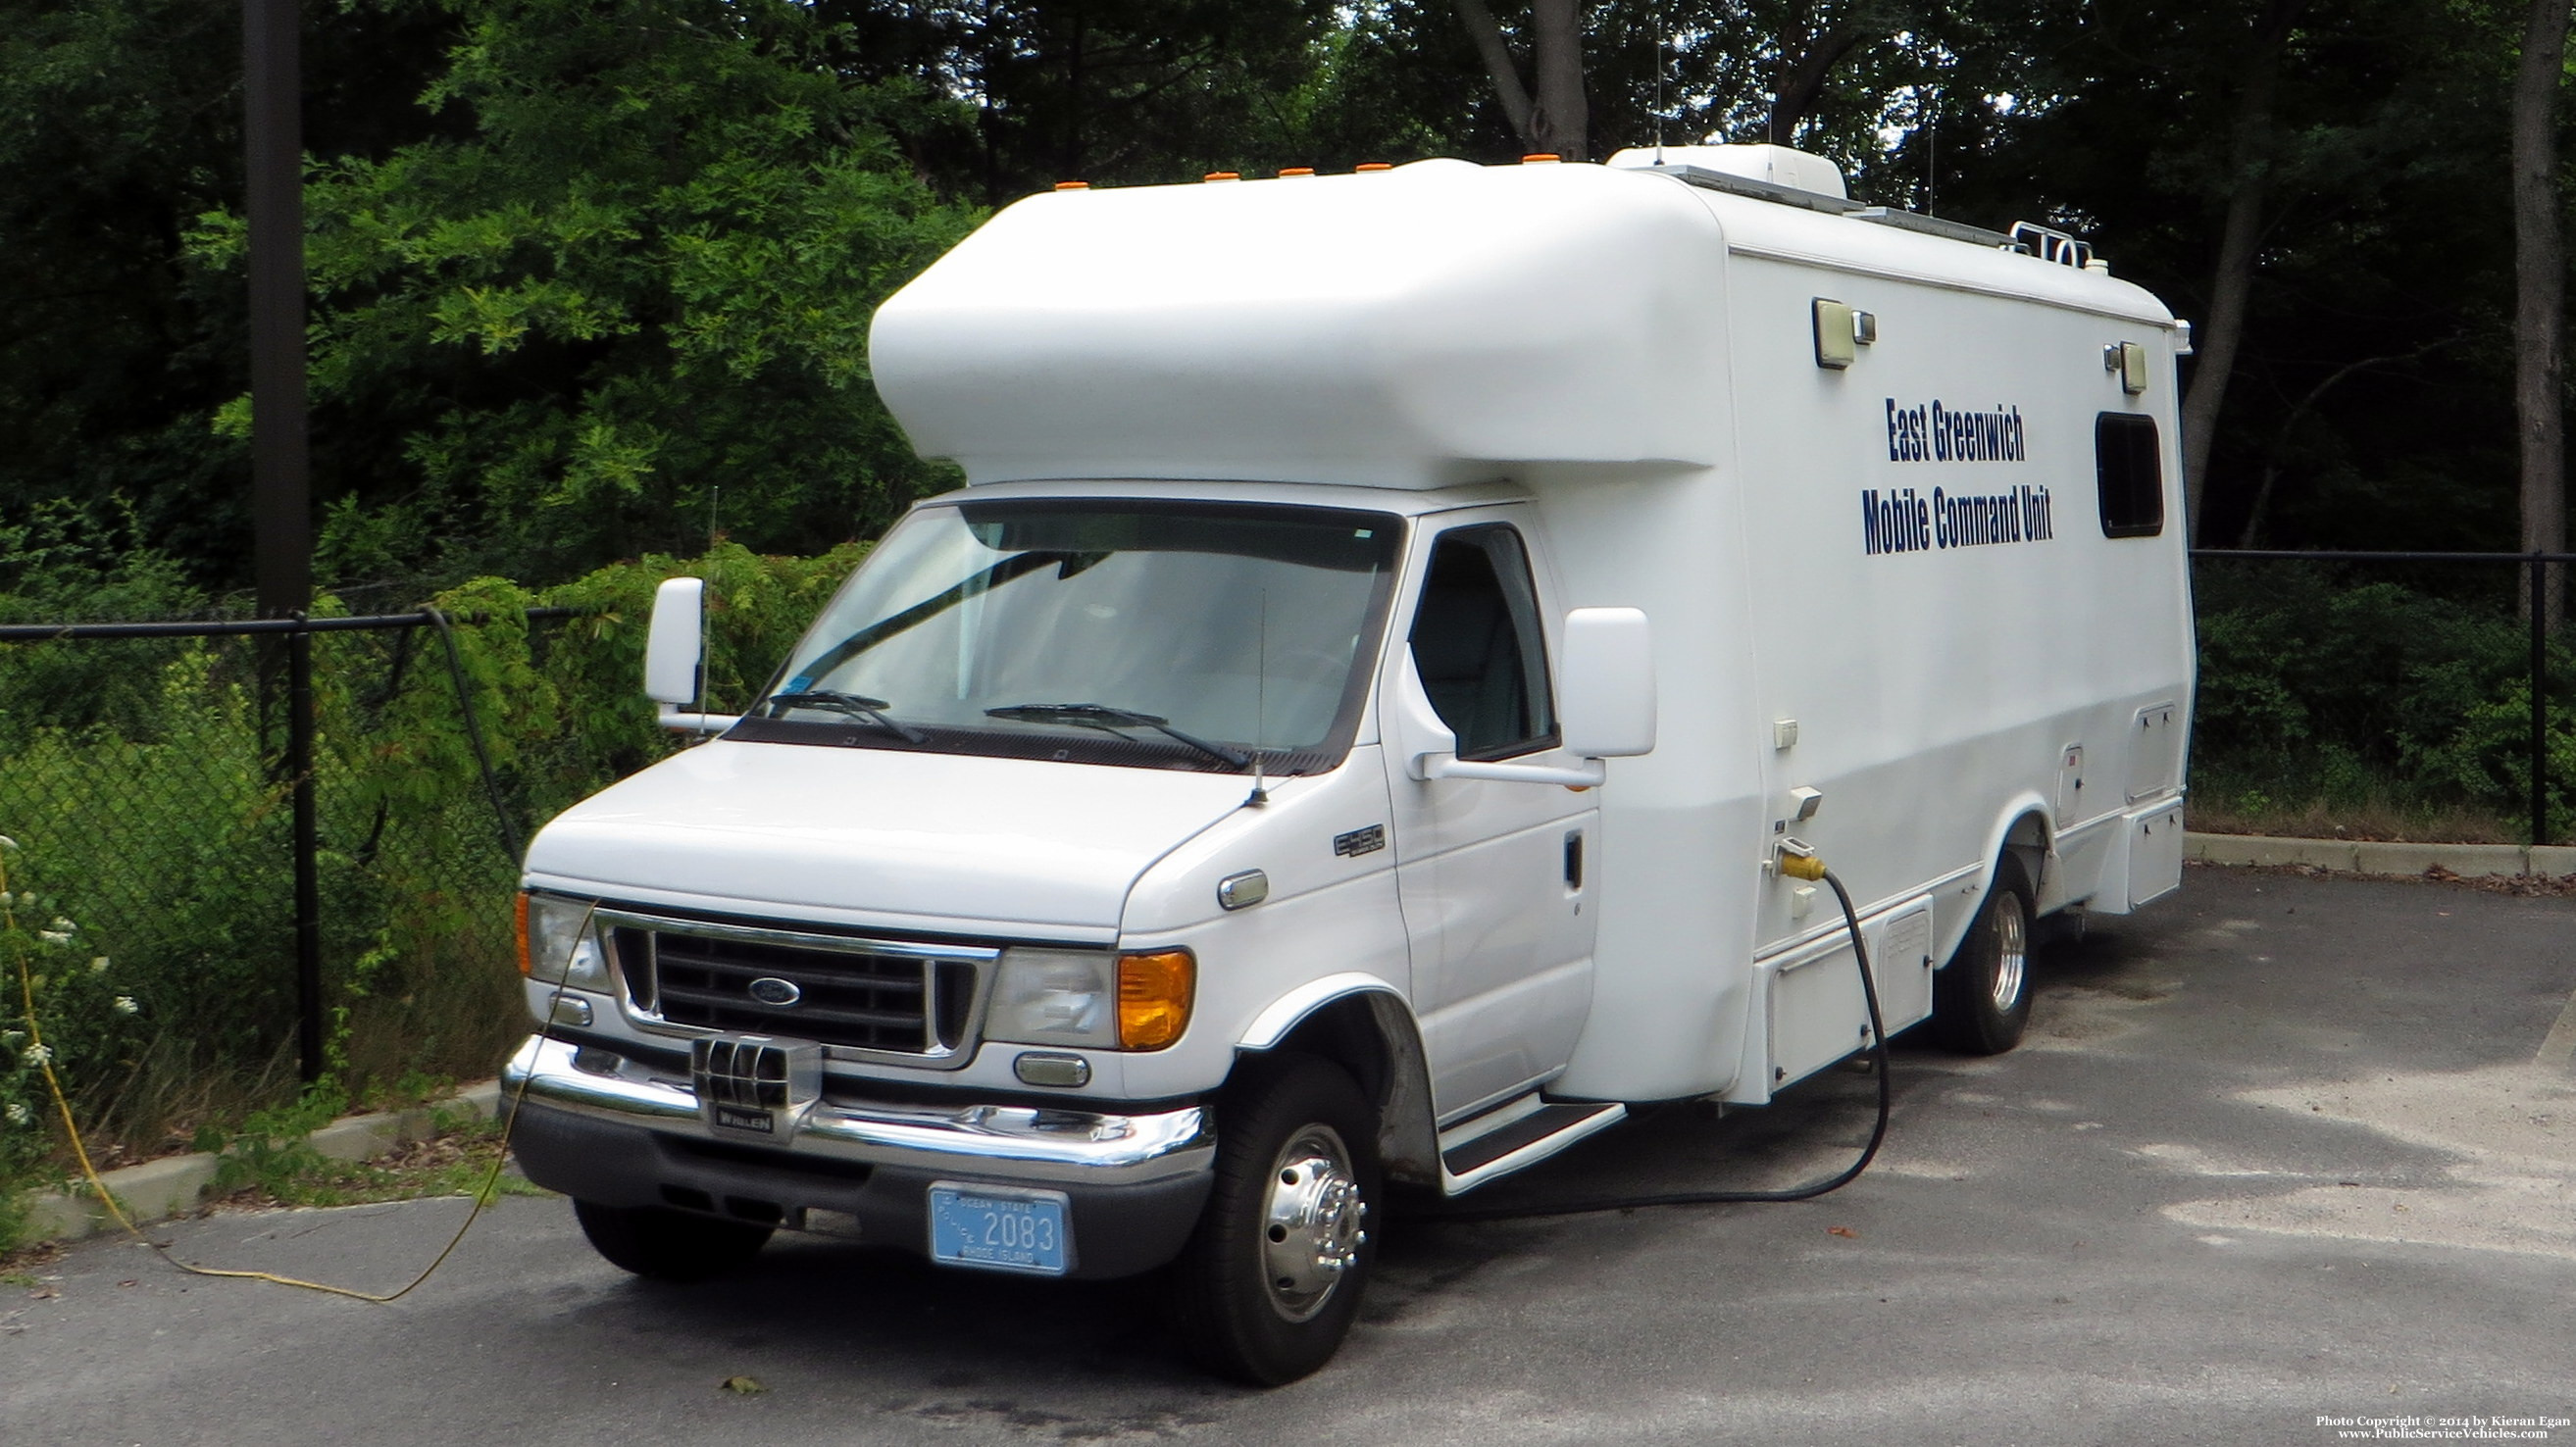 A photo  of East Greenwich Police
            Mobile Command Unit, a 1996-2006 Ford E-450             taken by Kieran Egan